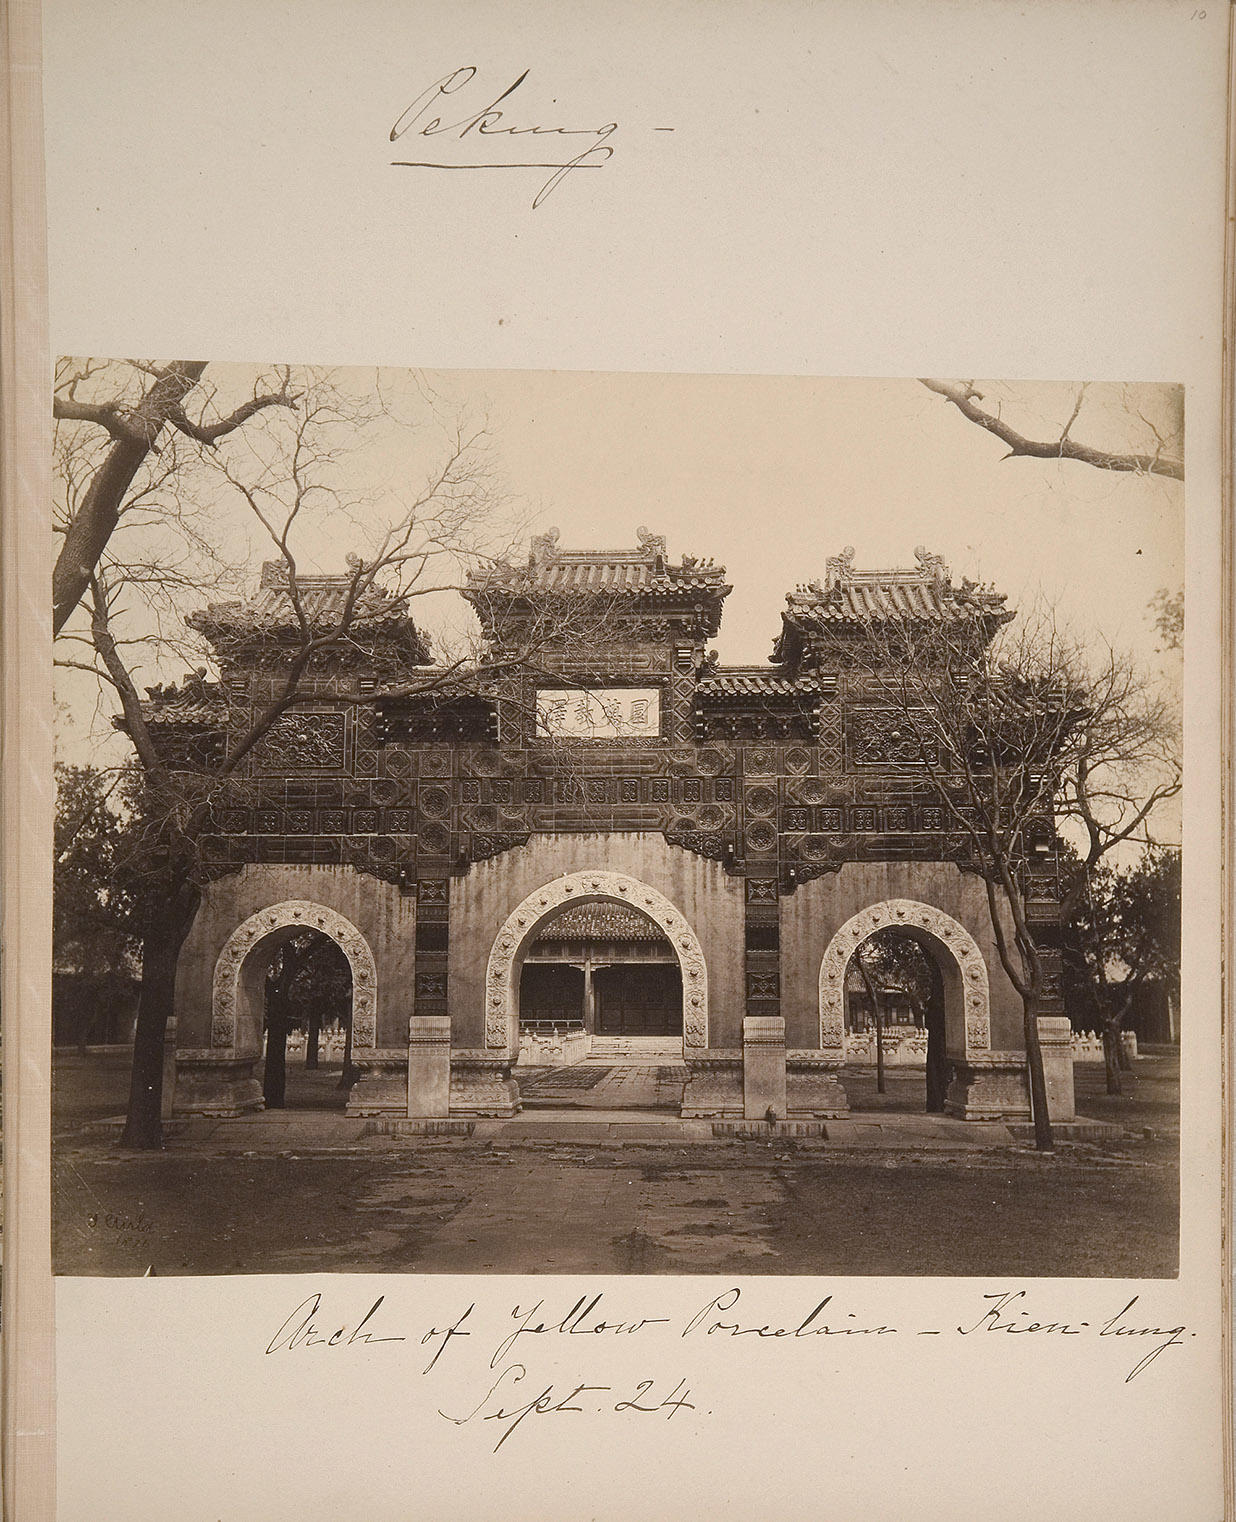 Isabella Stewart Gardner's Travel Album: China, 1883 showing the gate at the Imperial Academy in Beijing